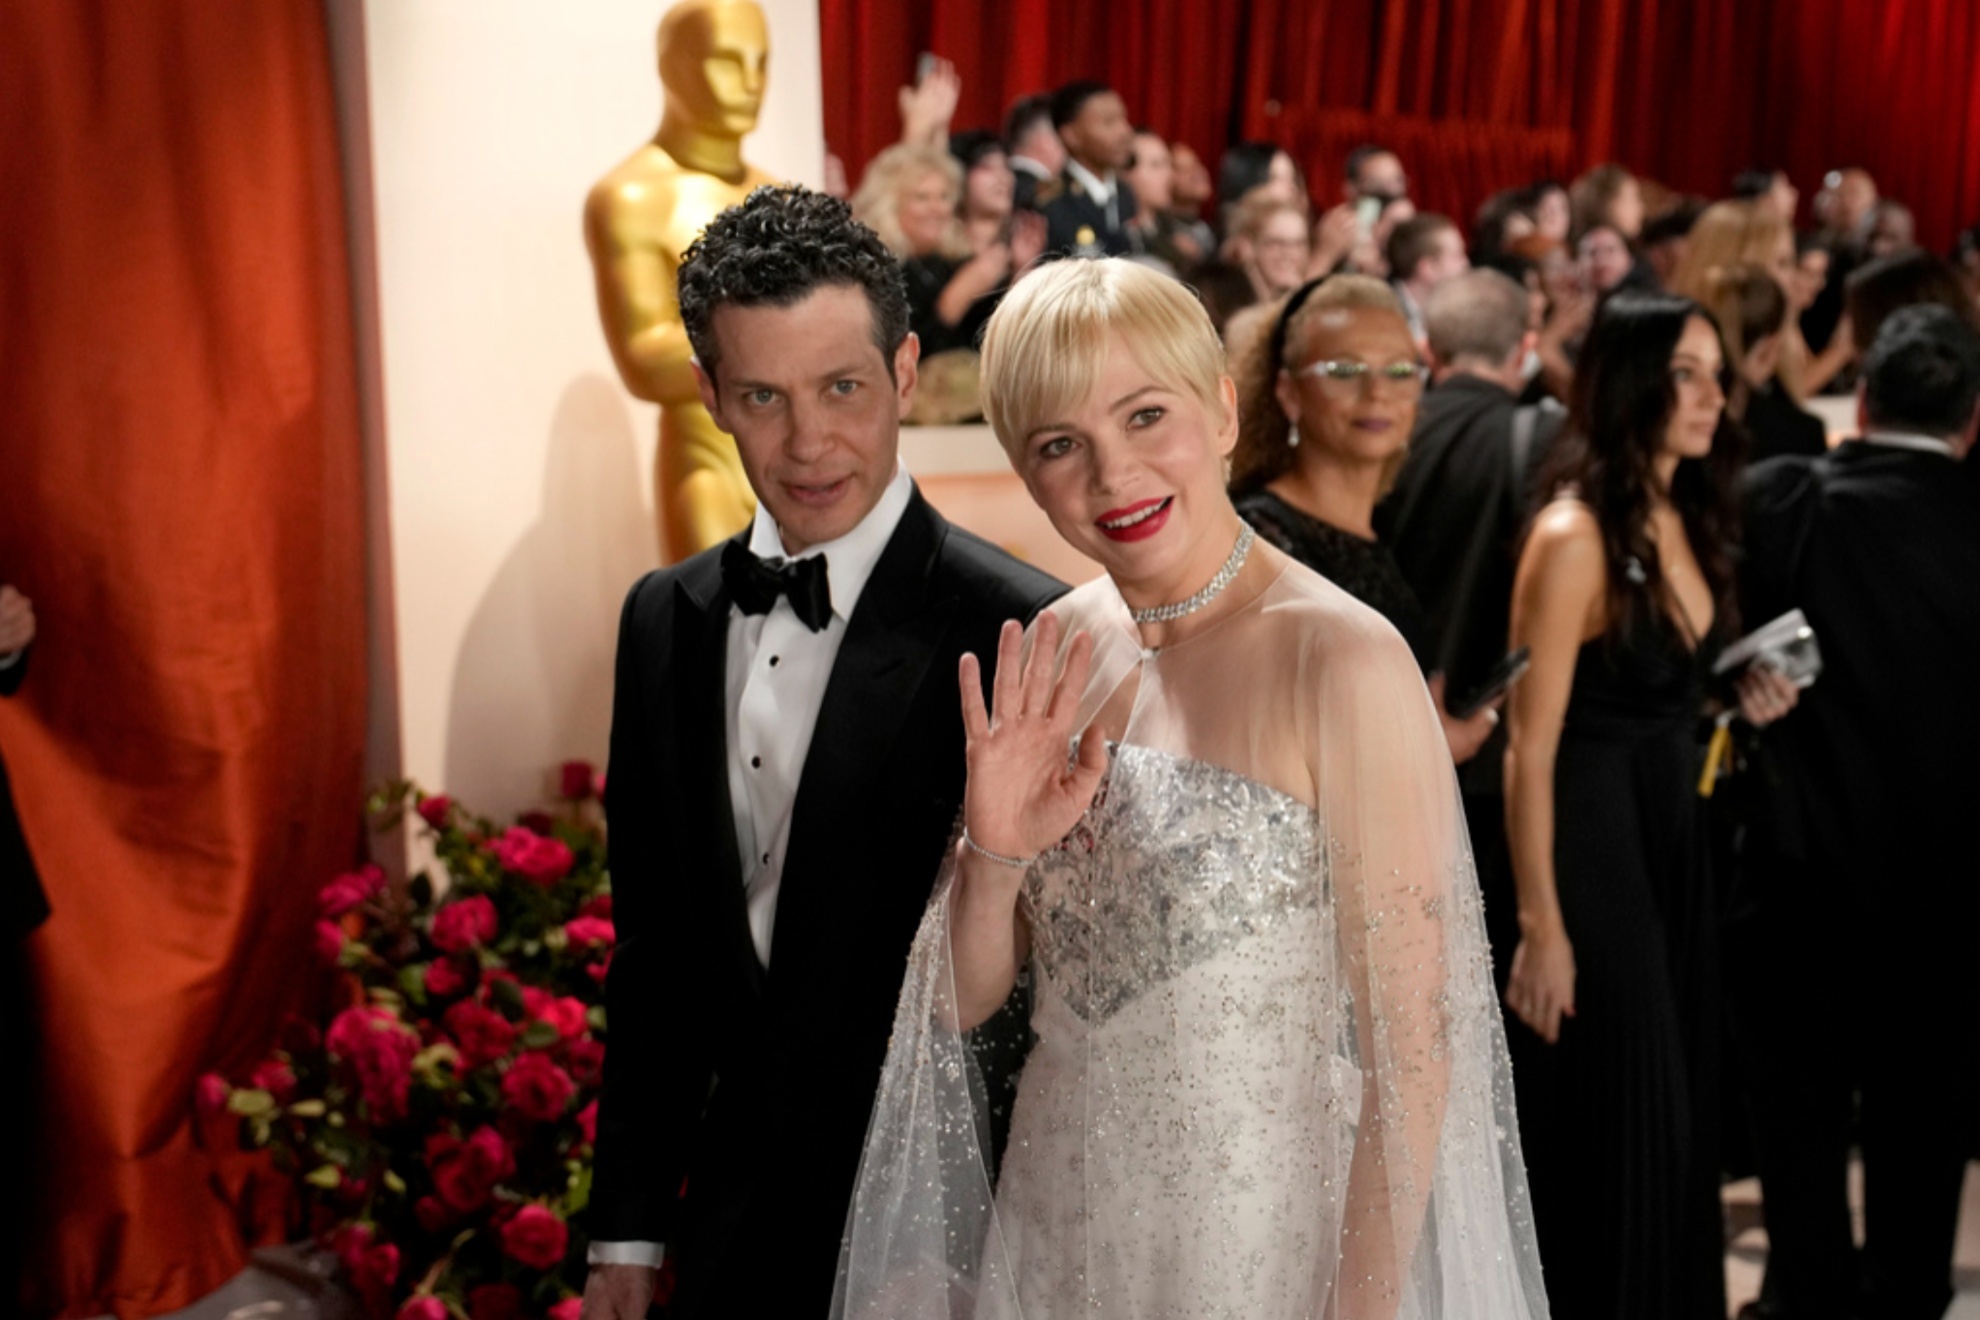 Thomas Kail, left, and Michelle Williams arrive at the Oscars on March 12, 2023